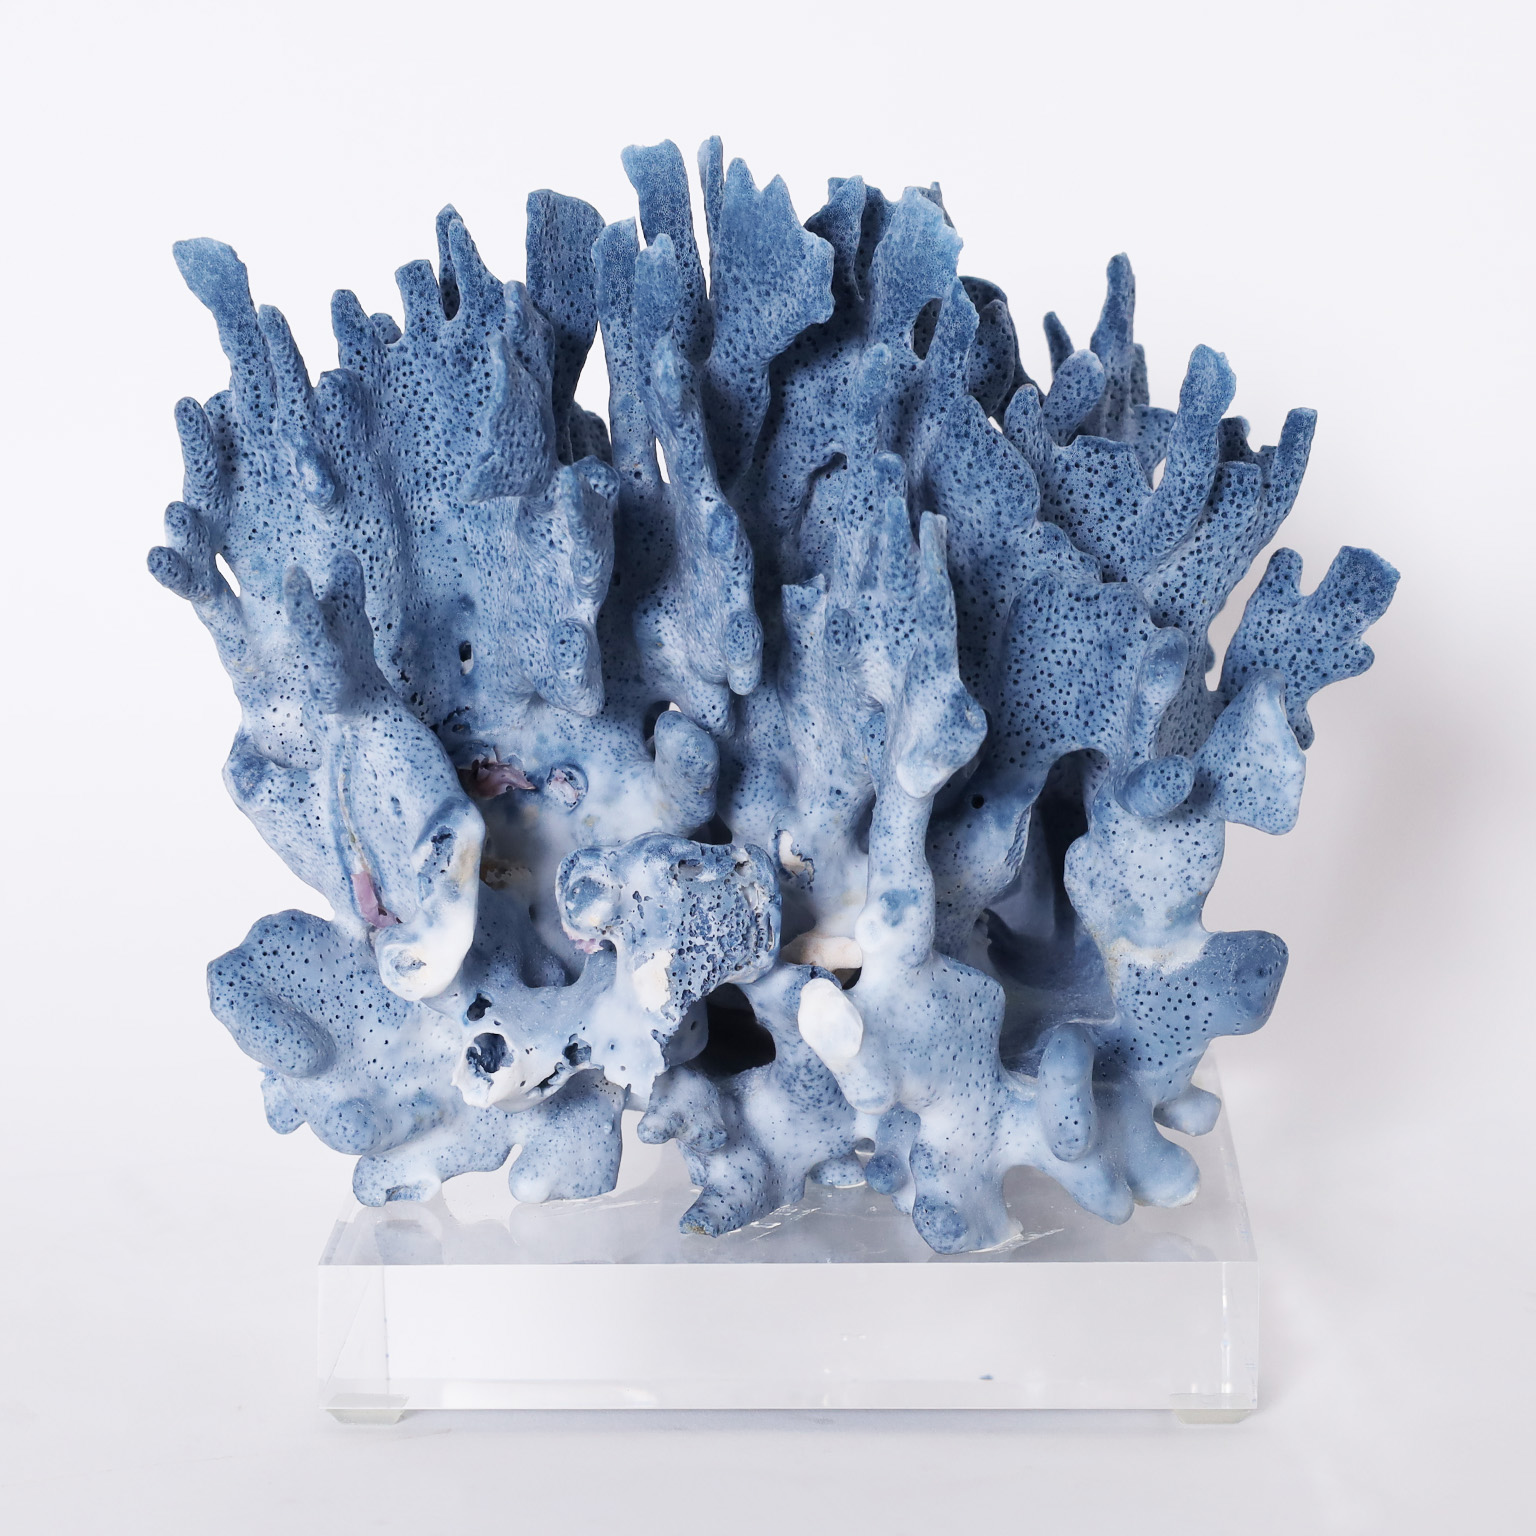 Three Blue Coral Specimens Mounted on Lucite